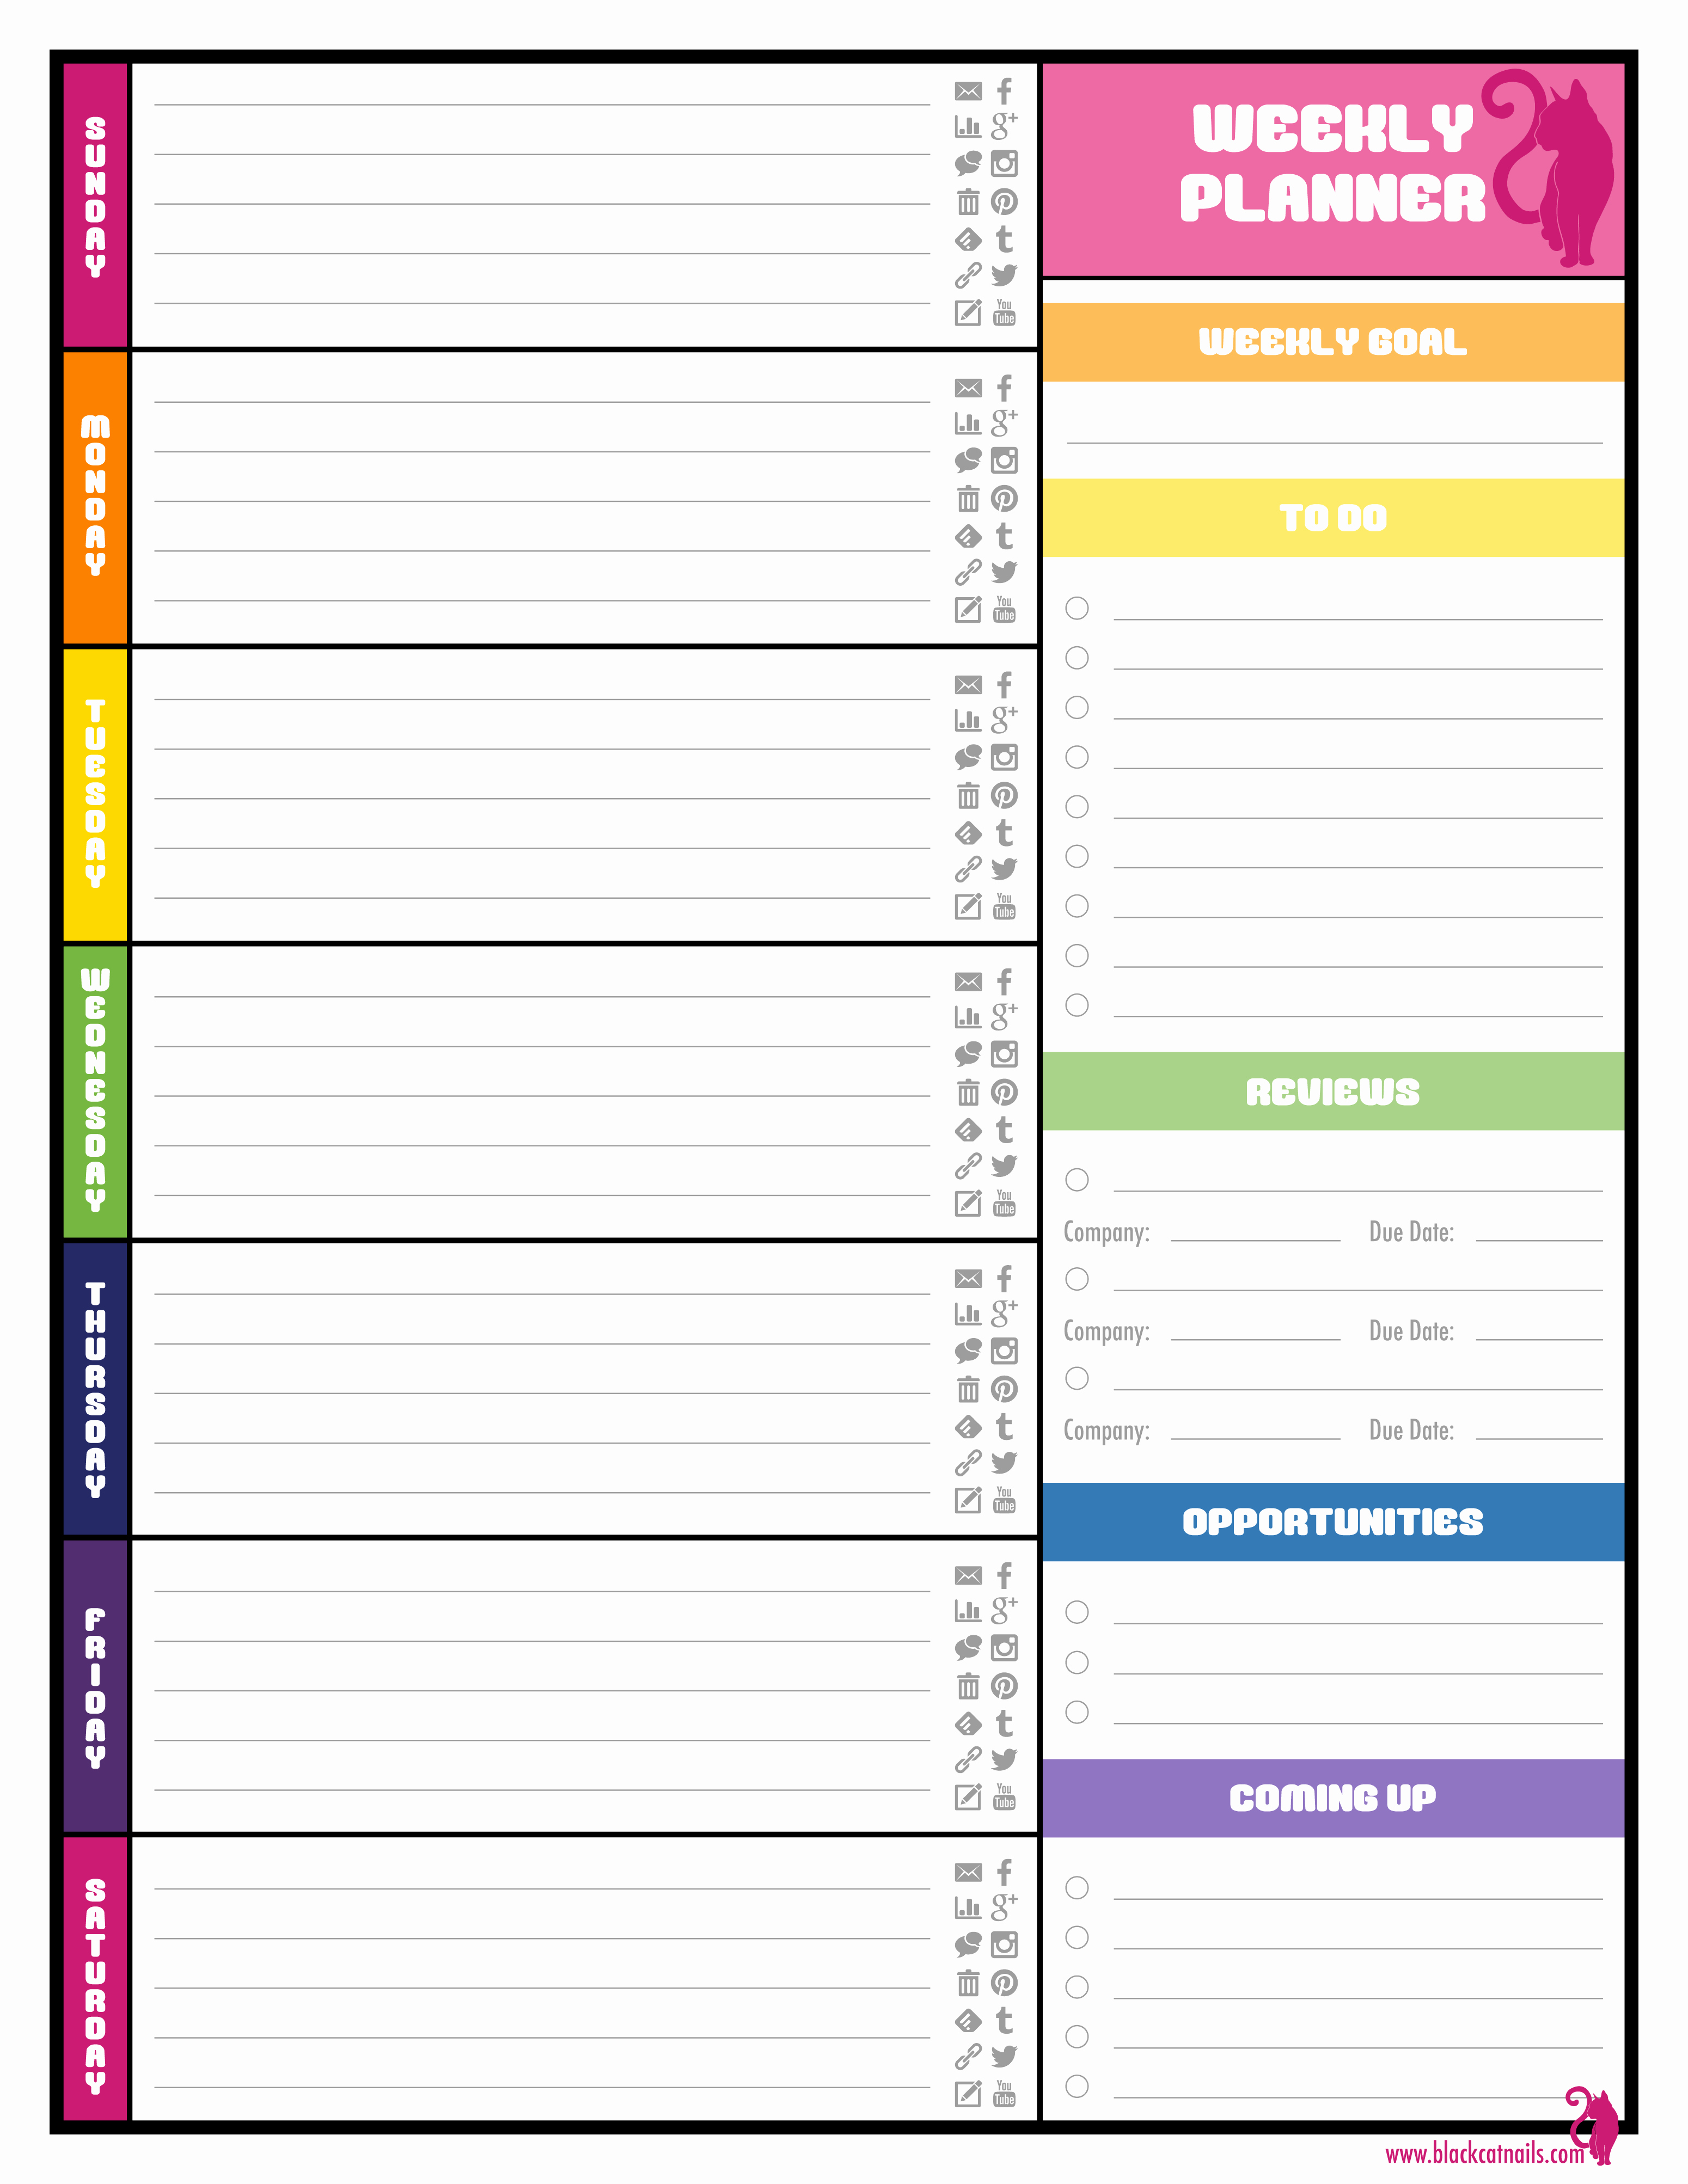 Week Schedule Template Pdf Lovely Weekly Planner Template Pdf Free Download the Best